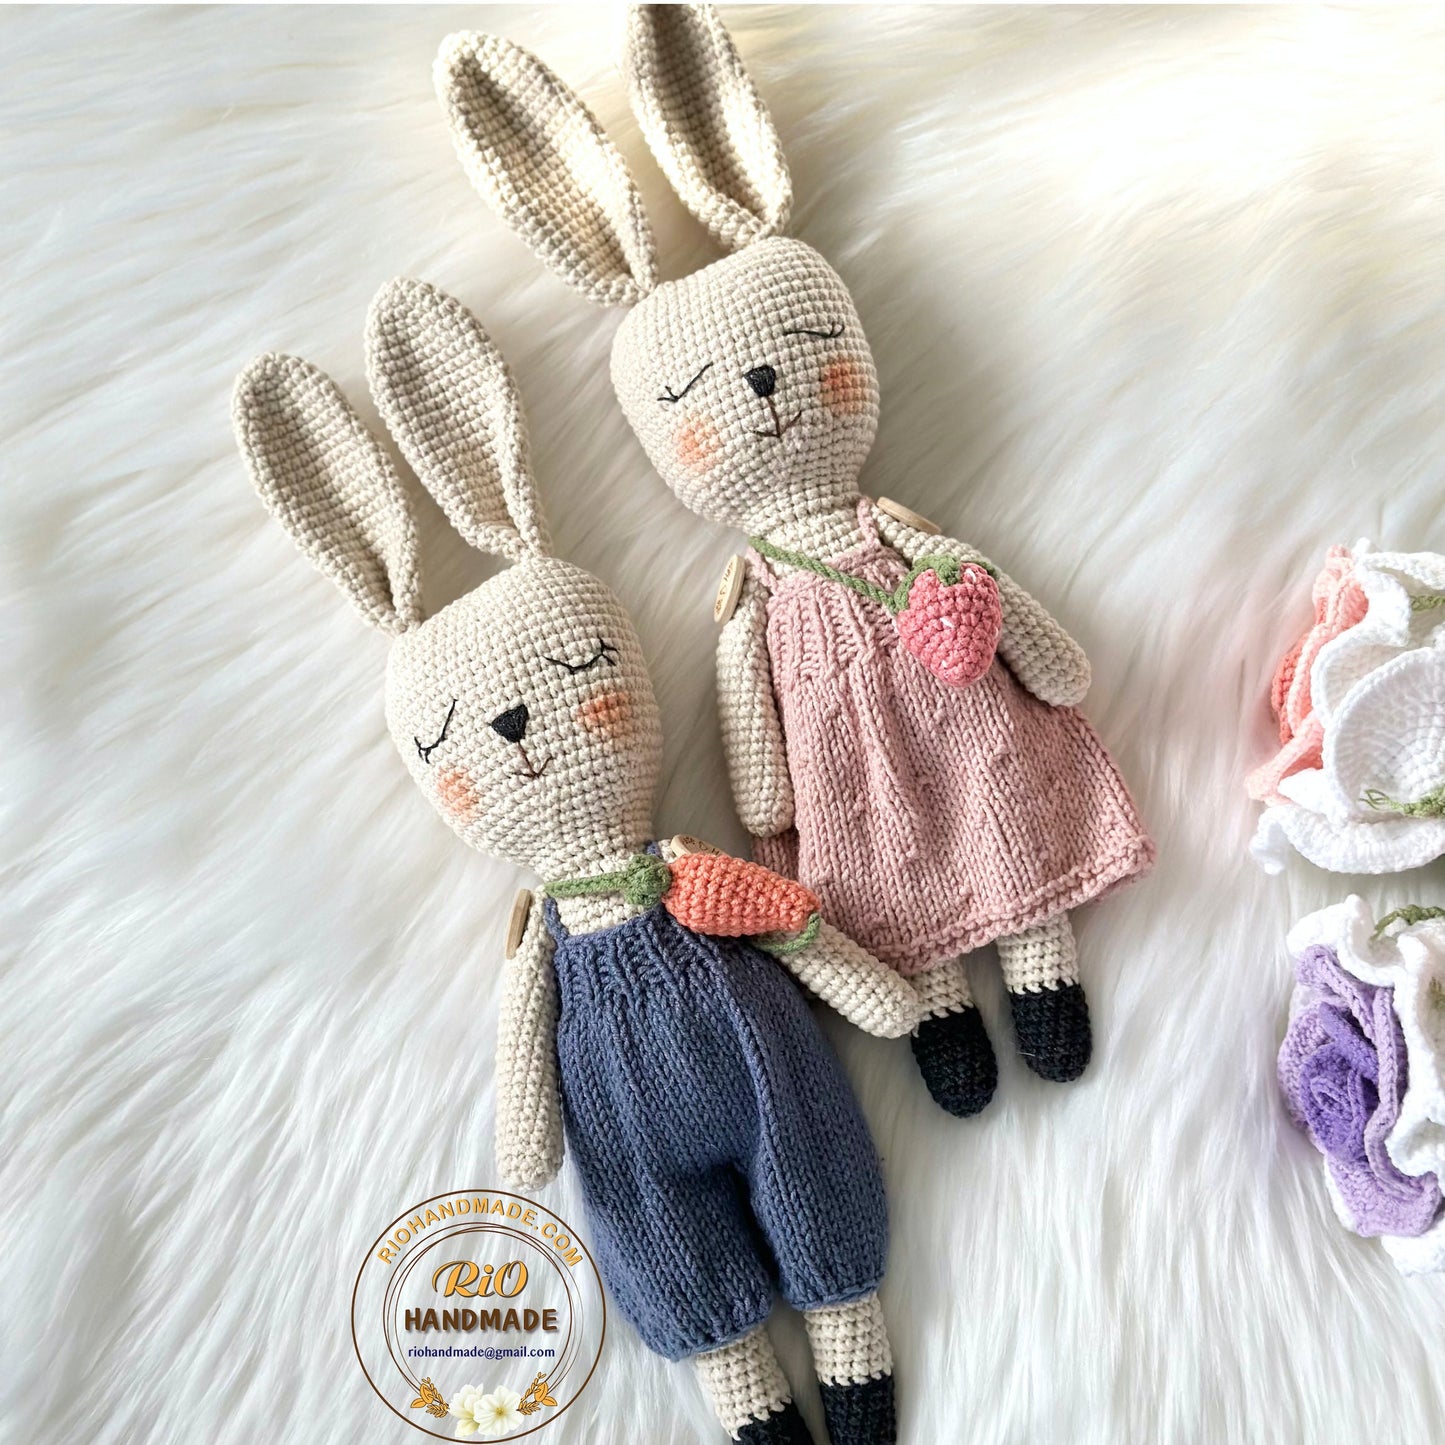 Ready To Ship, Handmade  bunny crochet, amigurumi bunny plushie, cute stuffed, soft toy for baby, toddler, adult hobby, Baby shower gift